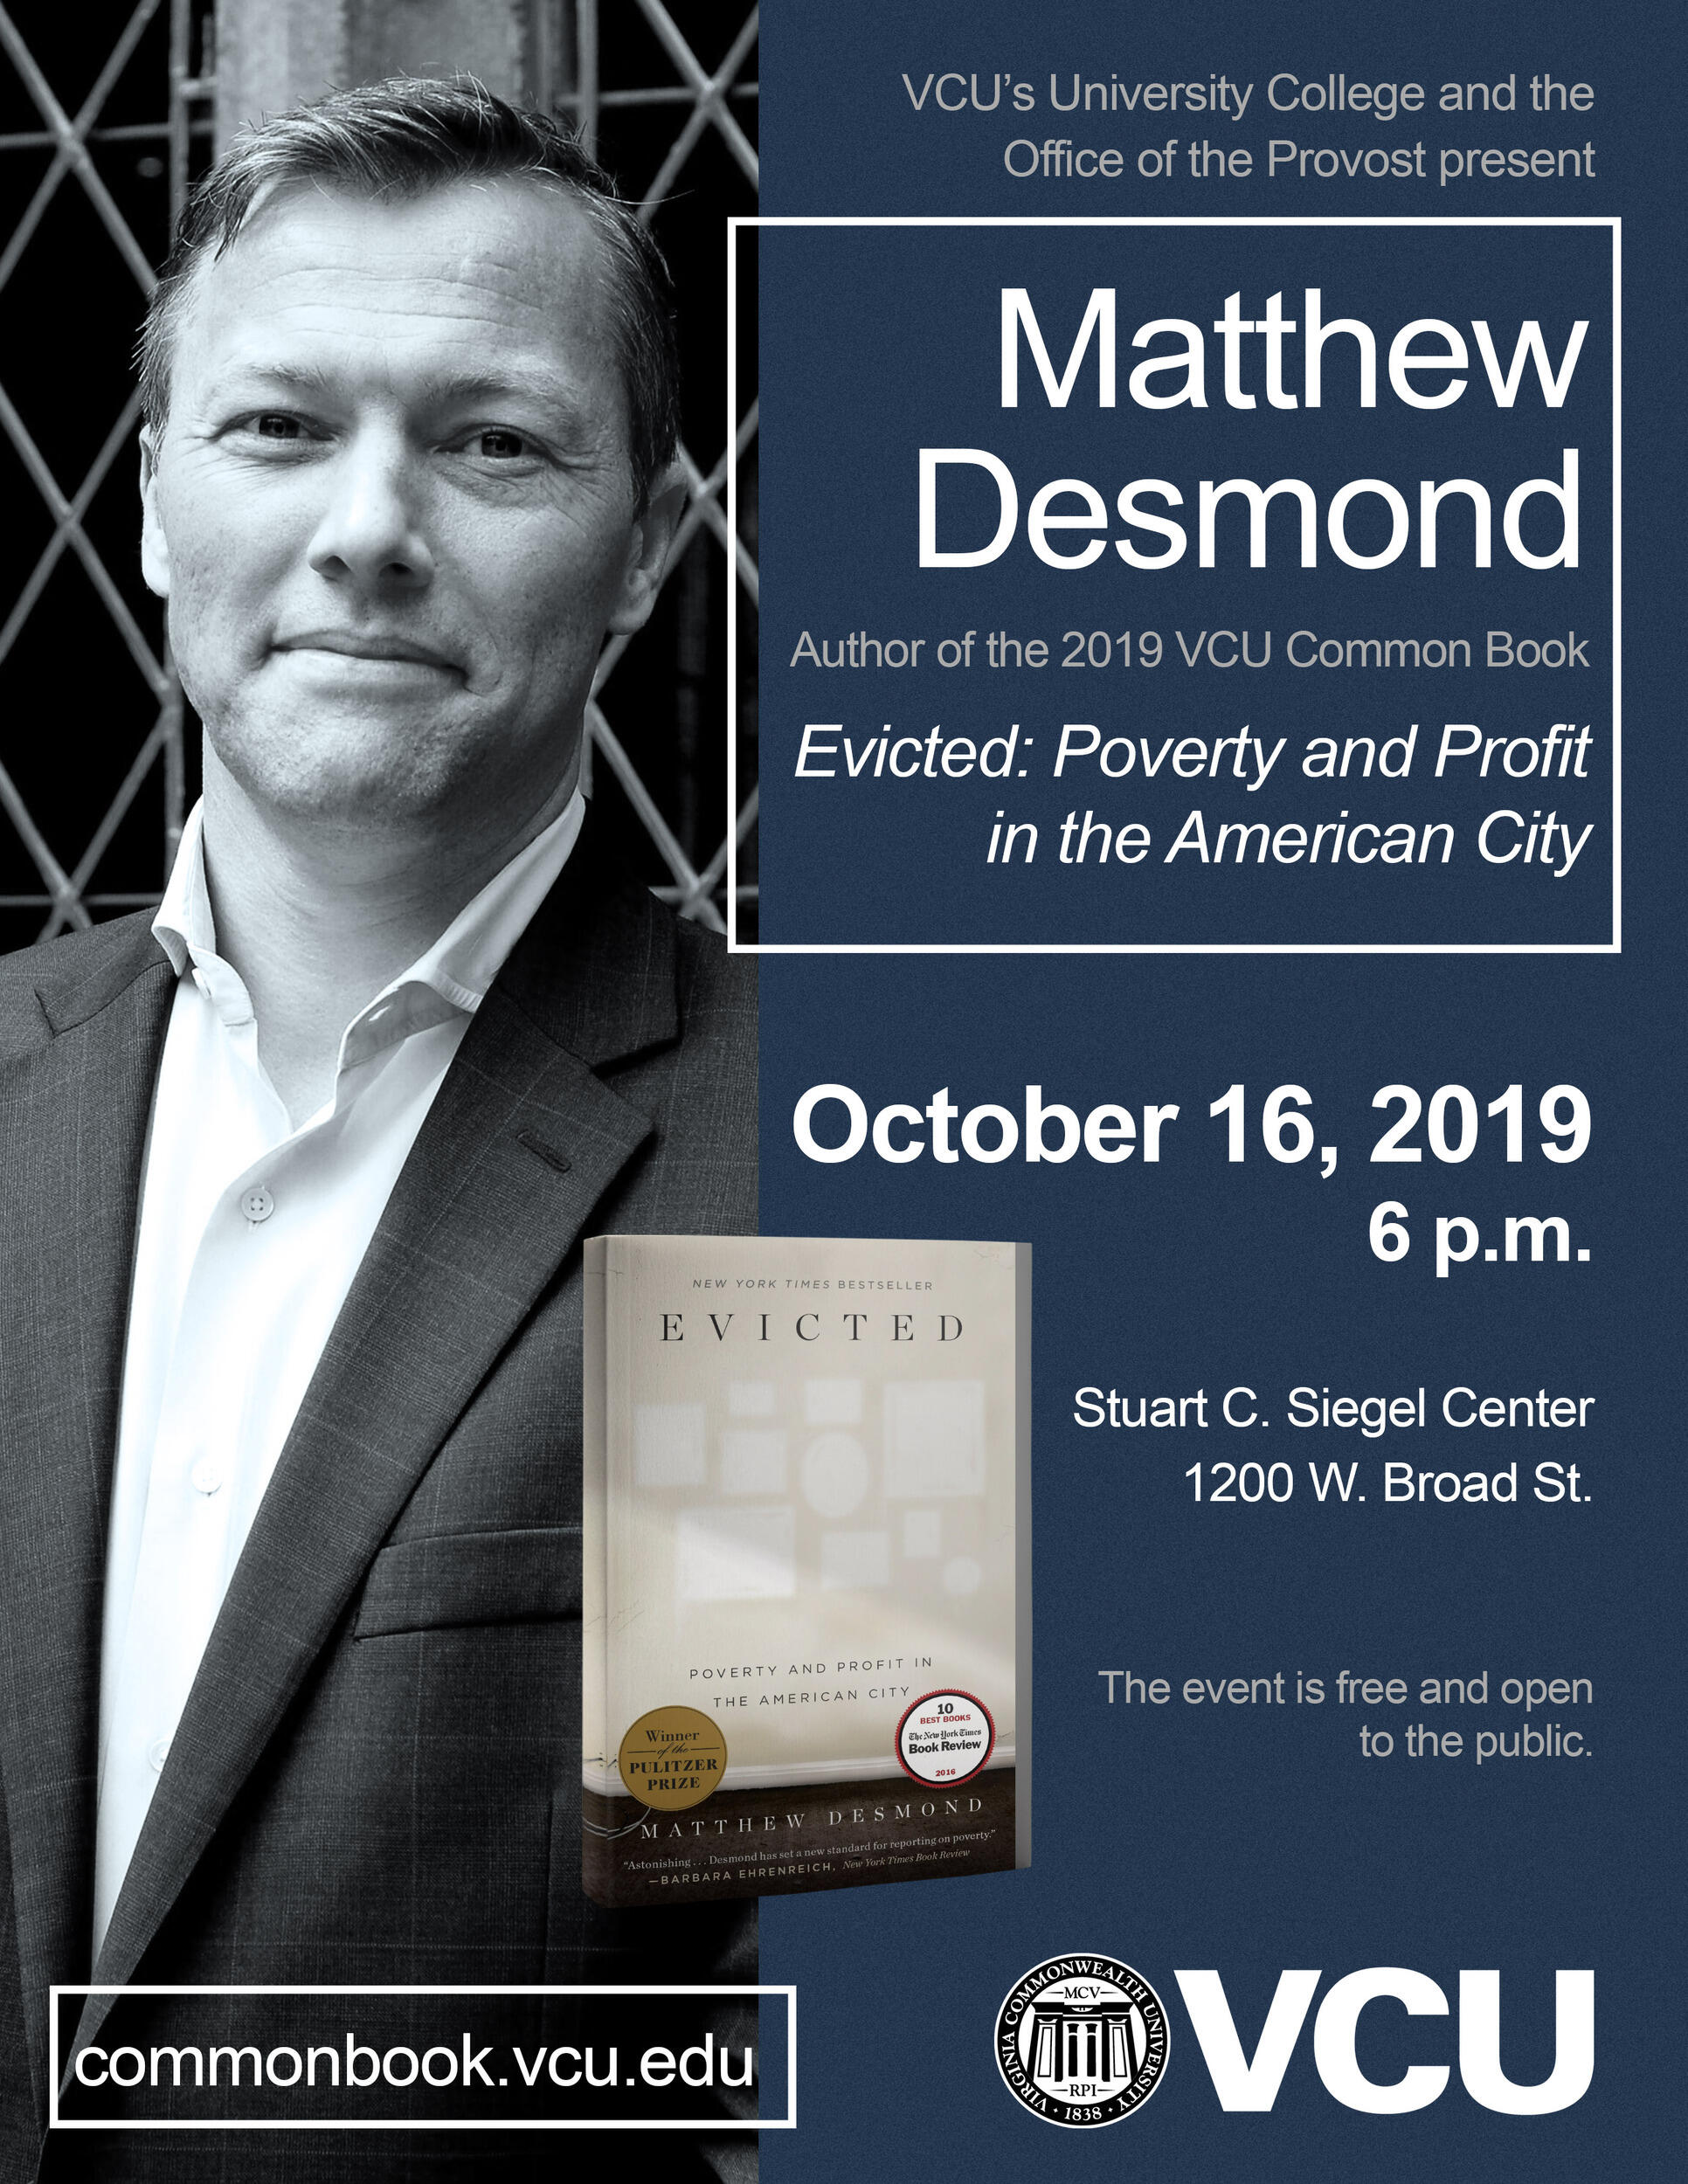 Photo of man standing and book cover. Text : VCU's University College and the Office of the Provost present Matthew Desmond Author of the 2019 VCU Common Book Evicted: Poverty and Profit in the American City October 16, 2019 6 p.m. Stuart C. Siegel CEnter 1200 W. Broad St. VCU